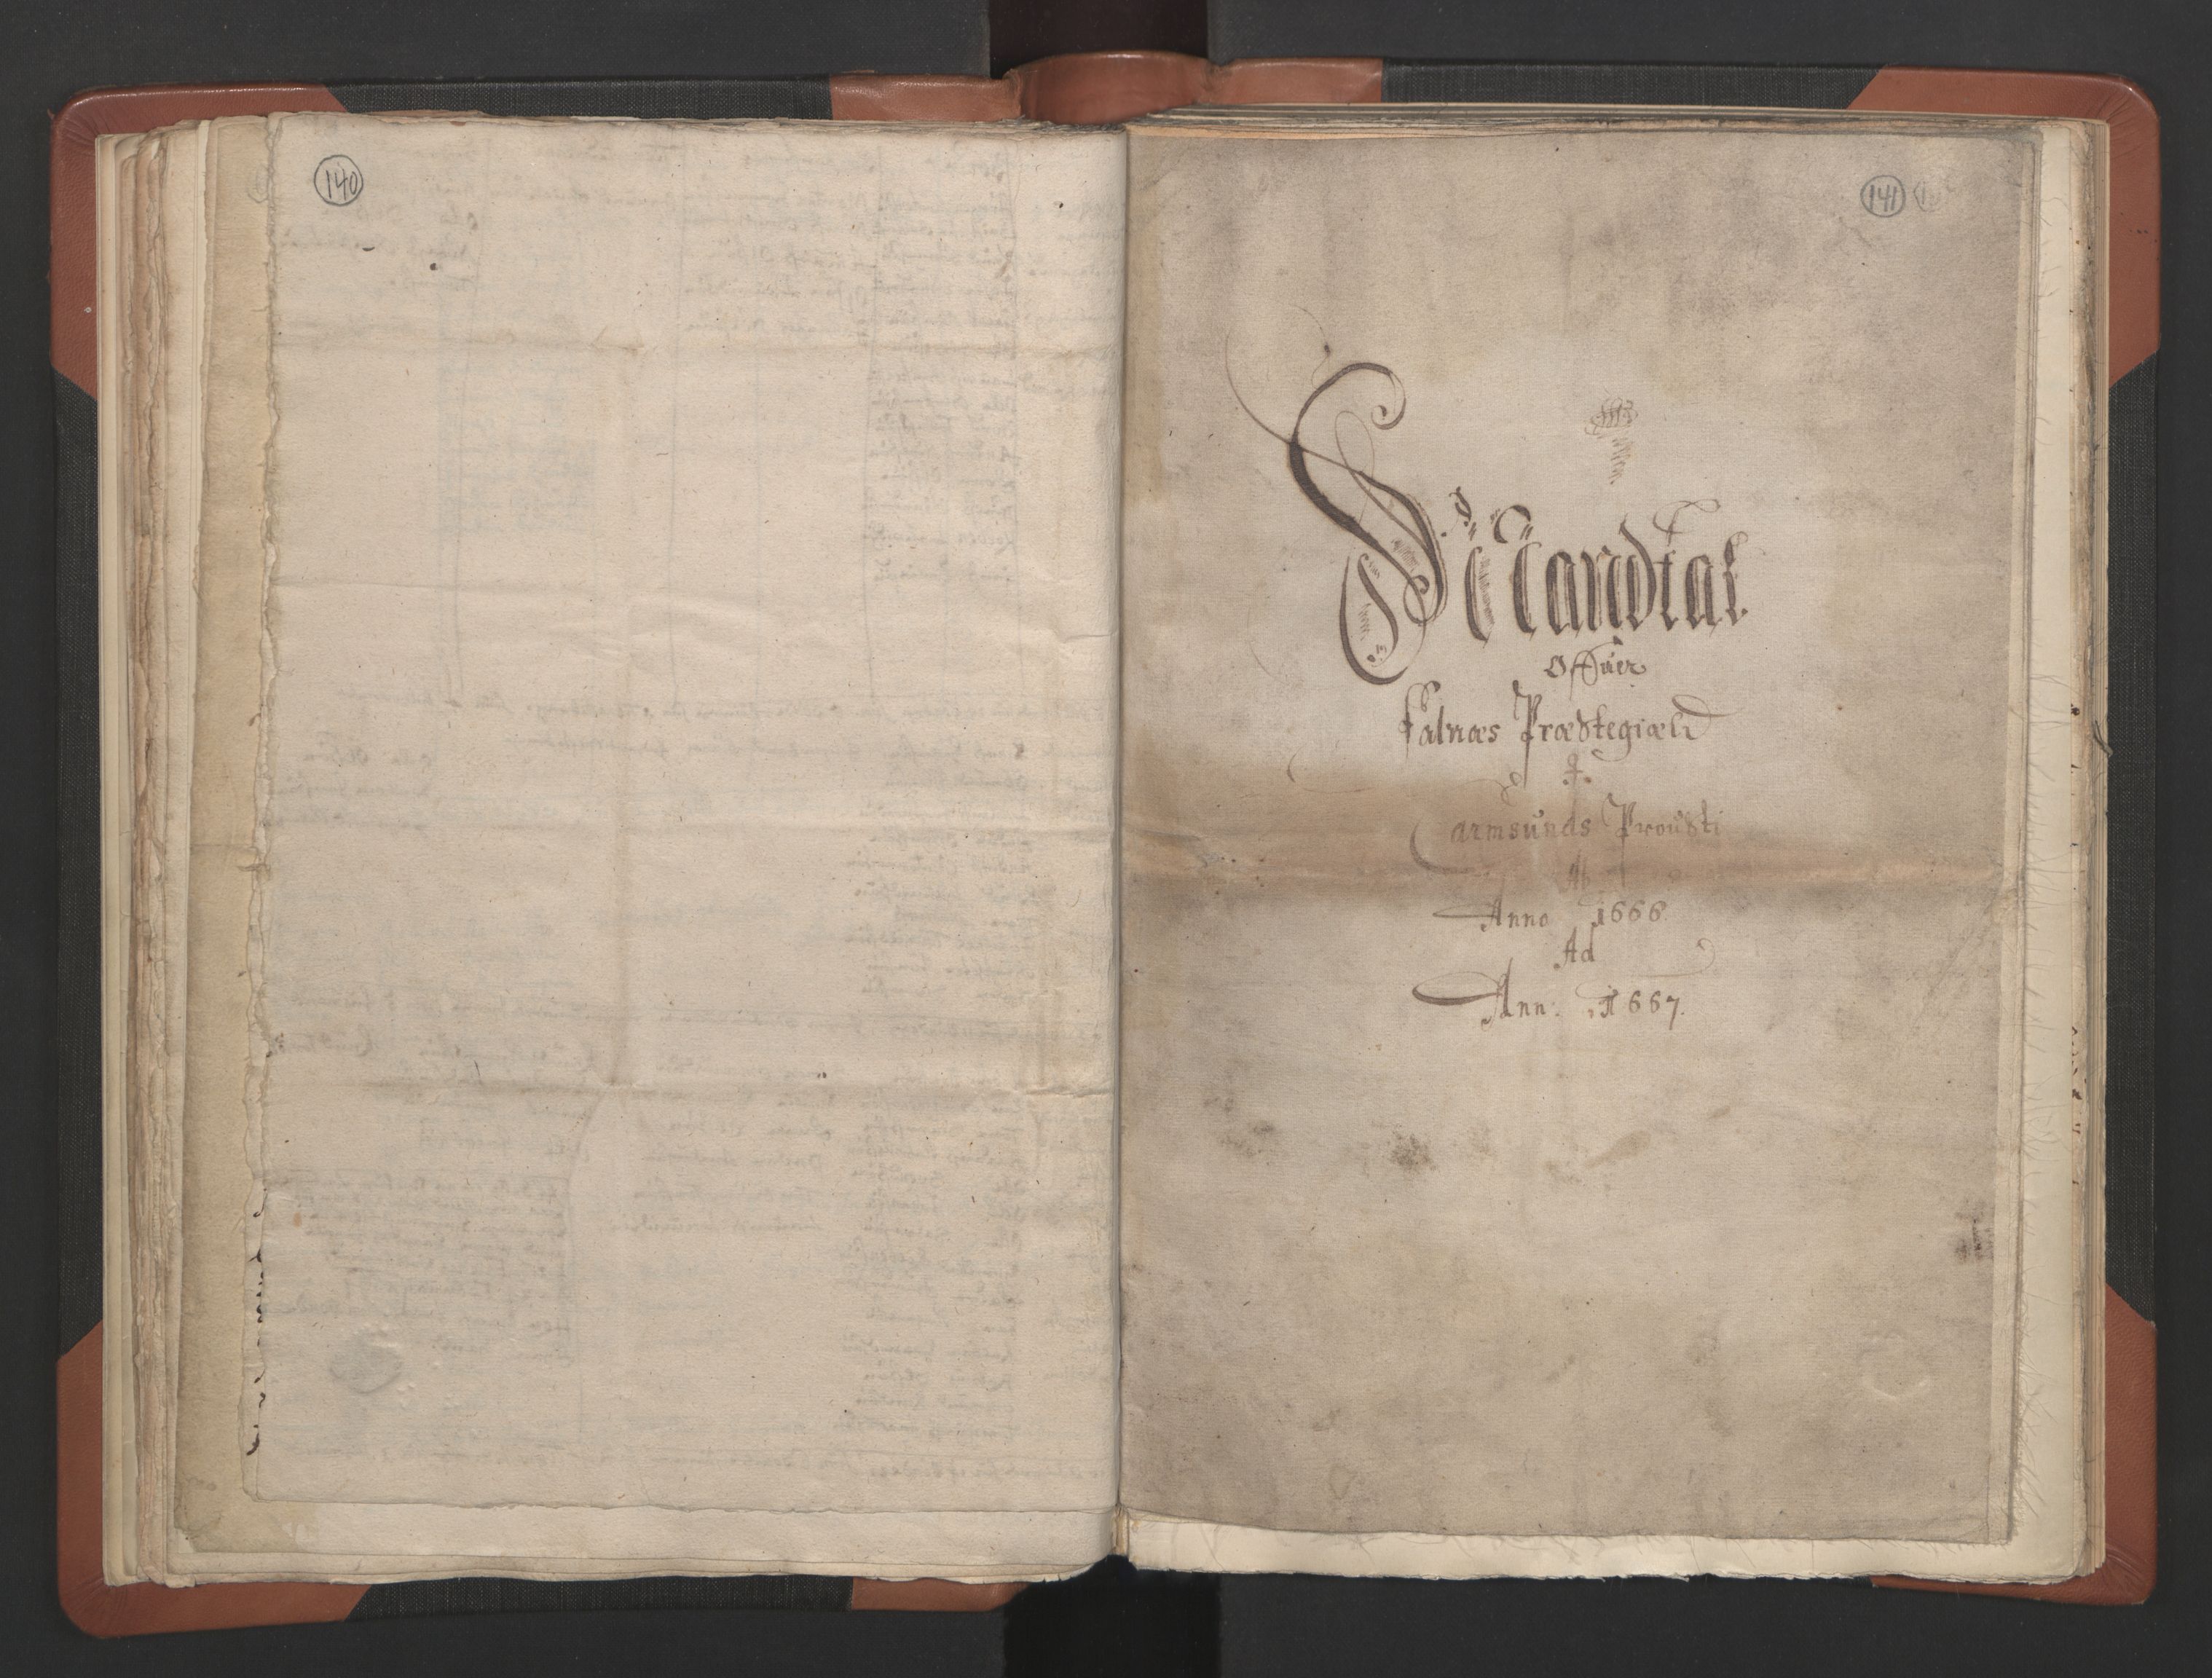 RA, Vicar's Census 1664-1666, no. 18: Stavanger deanery and Karmsund deanery, 1664-1666, p. 140-141